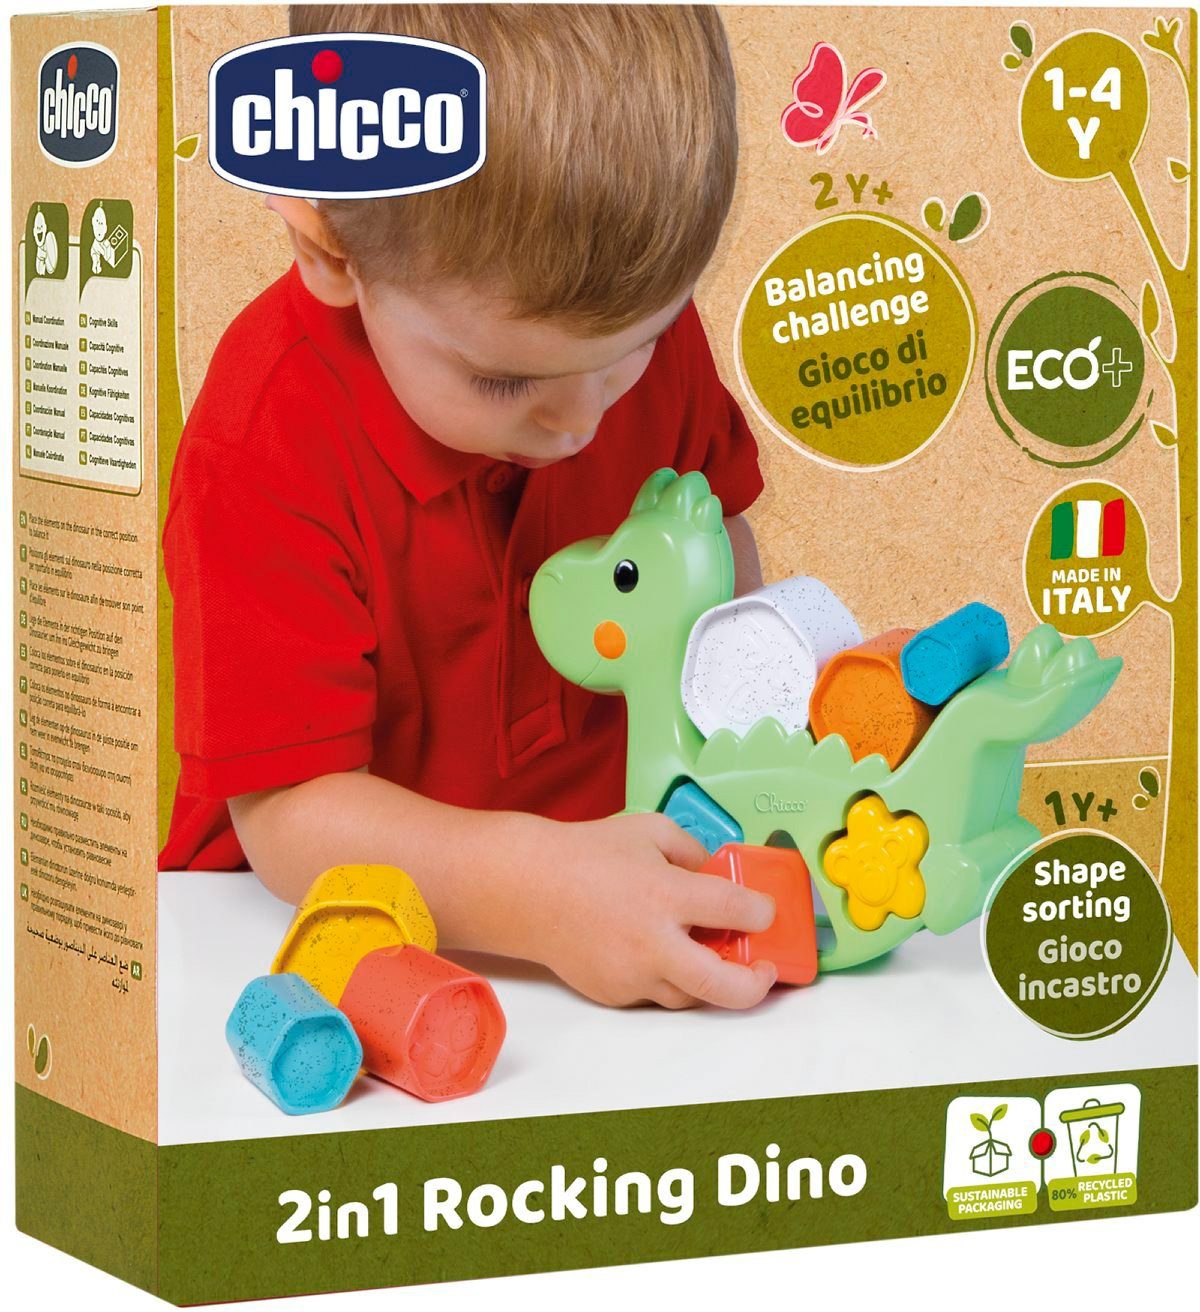 Chicco Lernspielzeug 2 in Made recyceltem Schaukeldino, In Material; teilweise 1 Europe aus